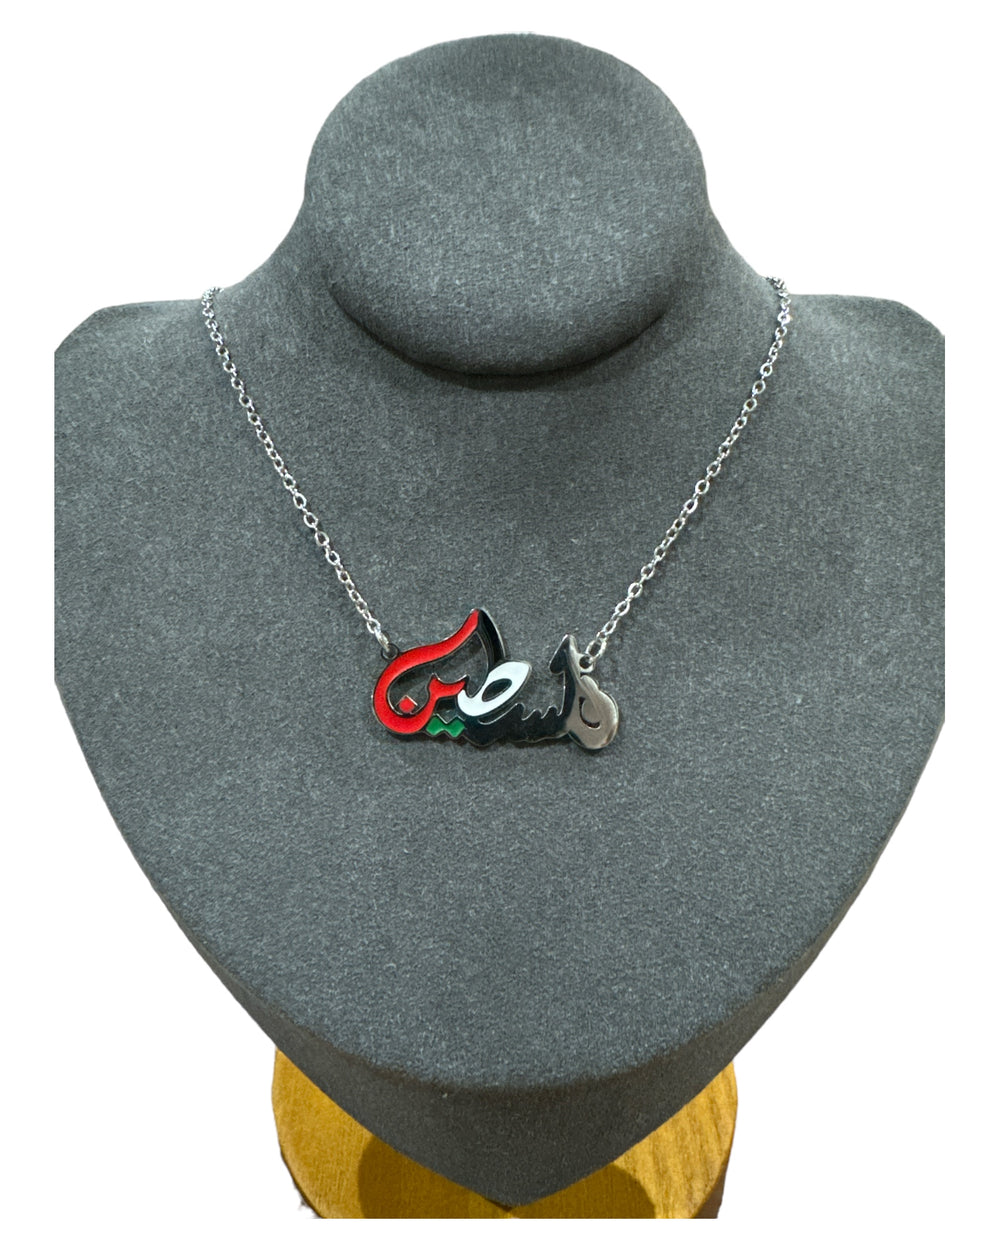 Patriotic Script: Silver Necklace with 'Palestine' in Arabic & Flag Colors